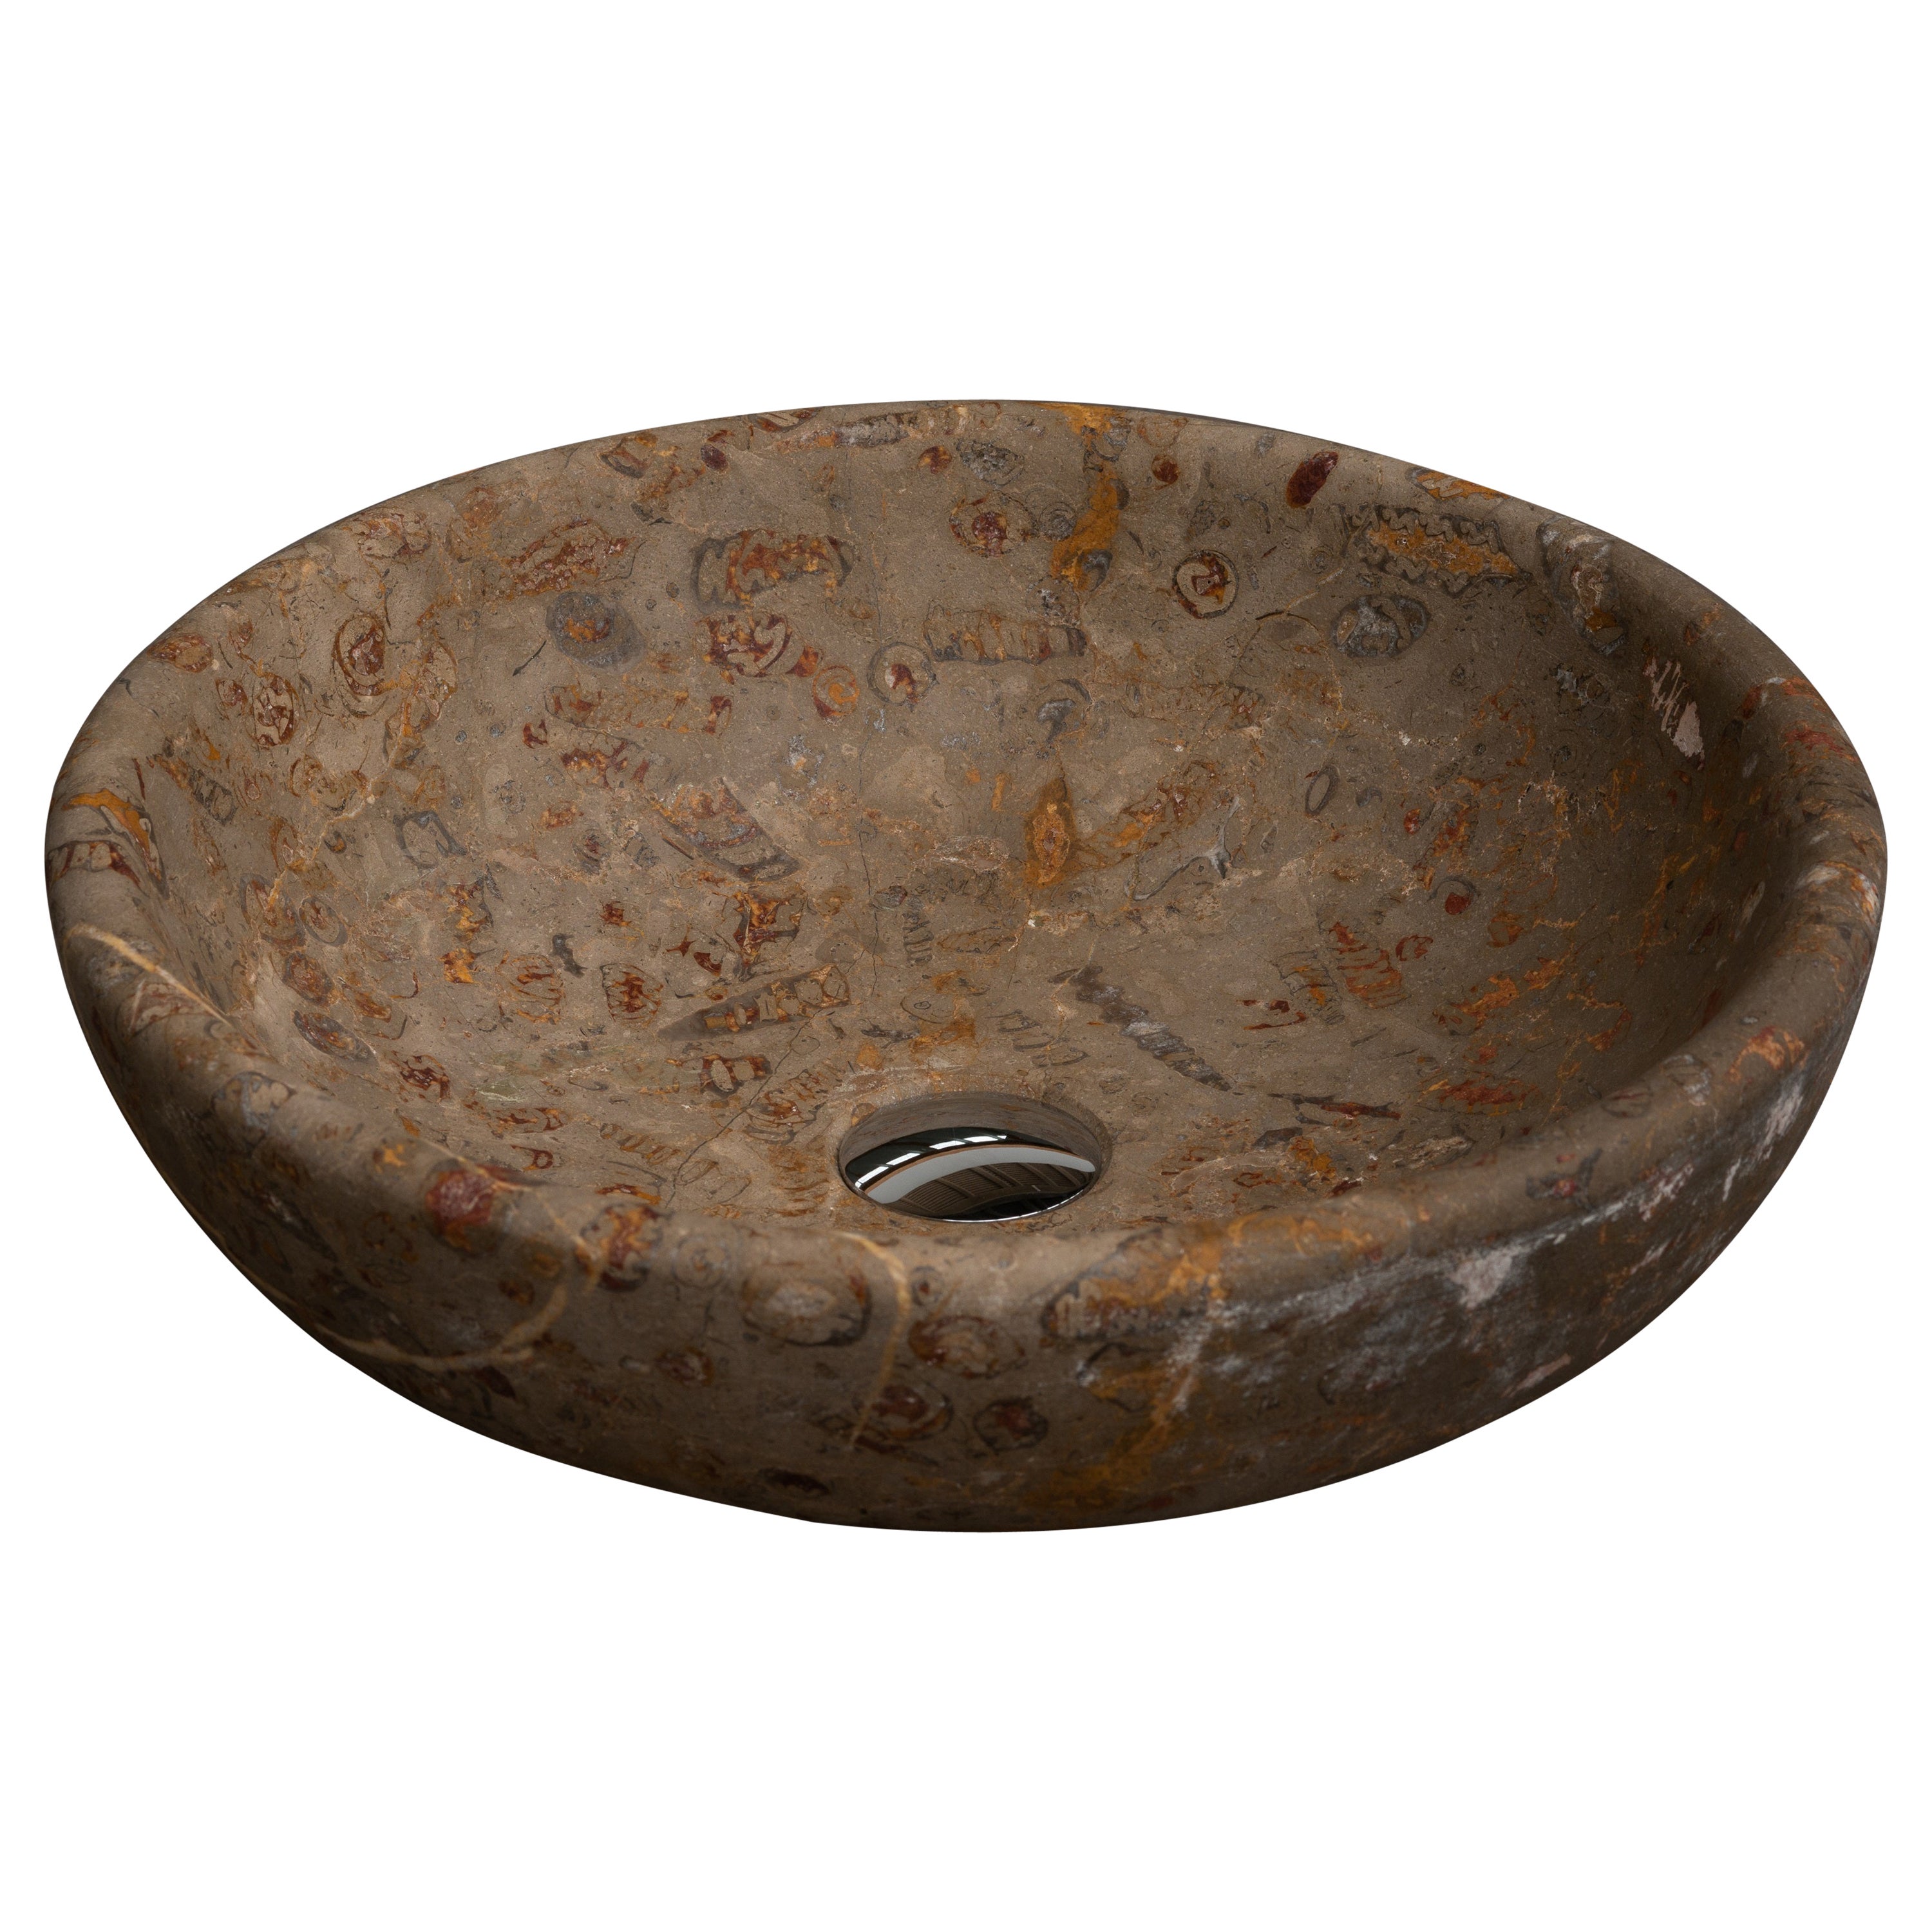 Aina Contemporary Jurassic Fossil Marble Leda Sink, Living Collection For Sale